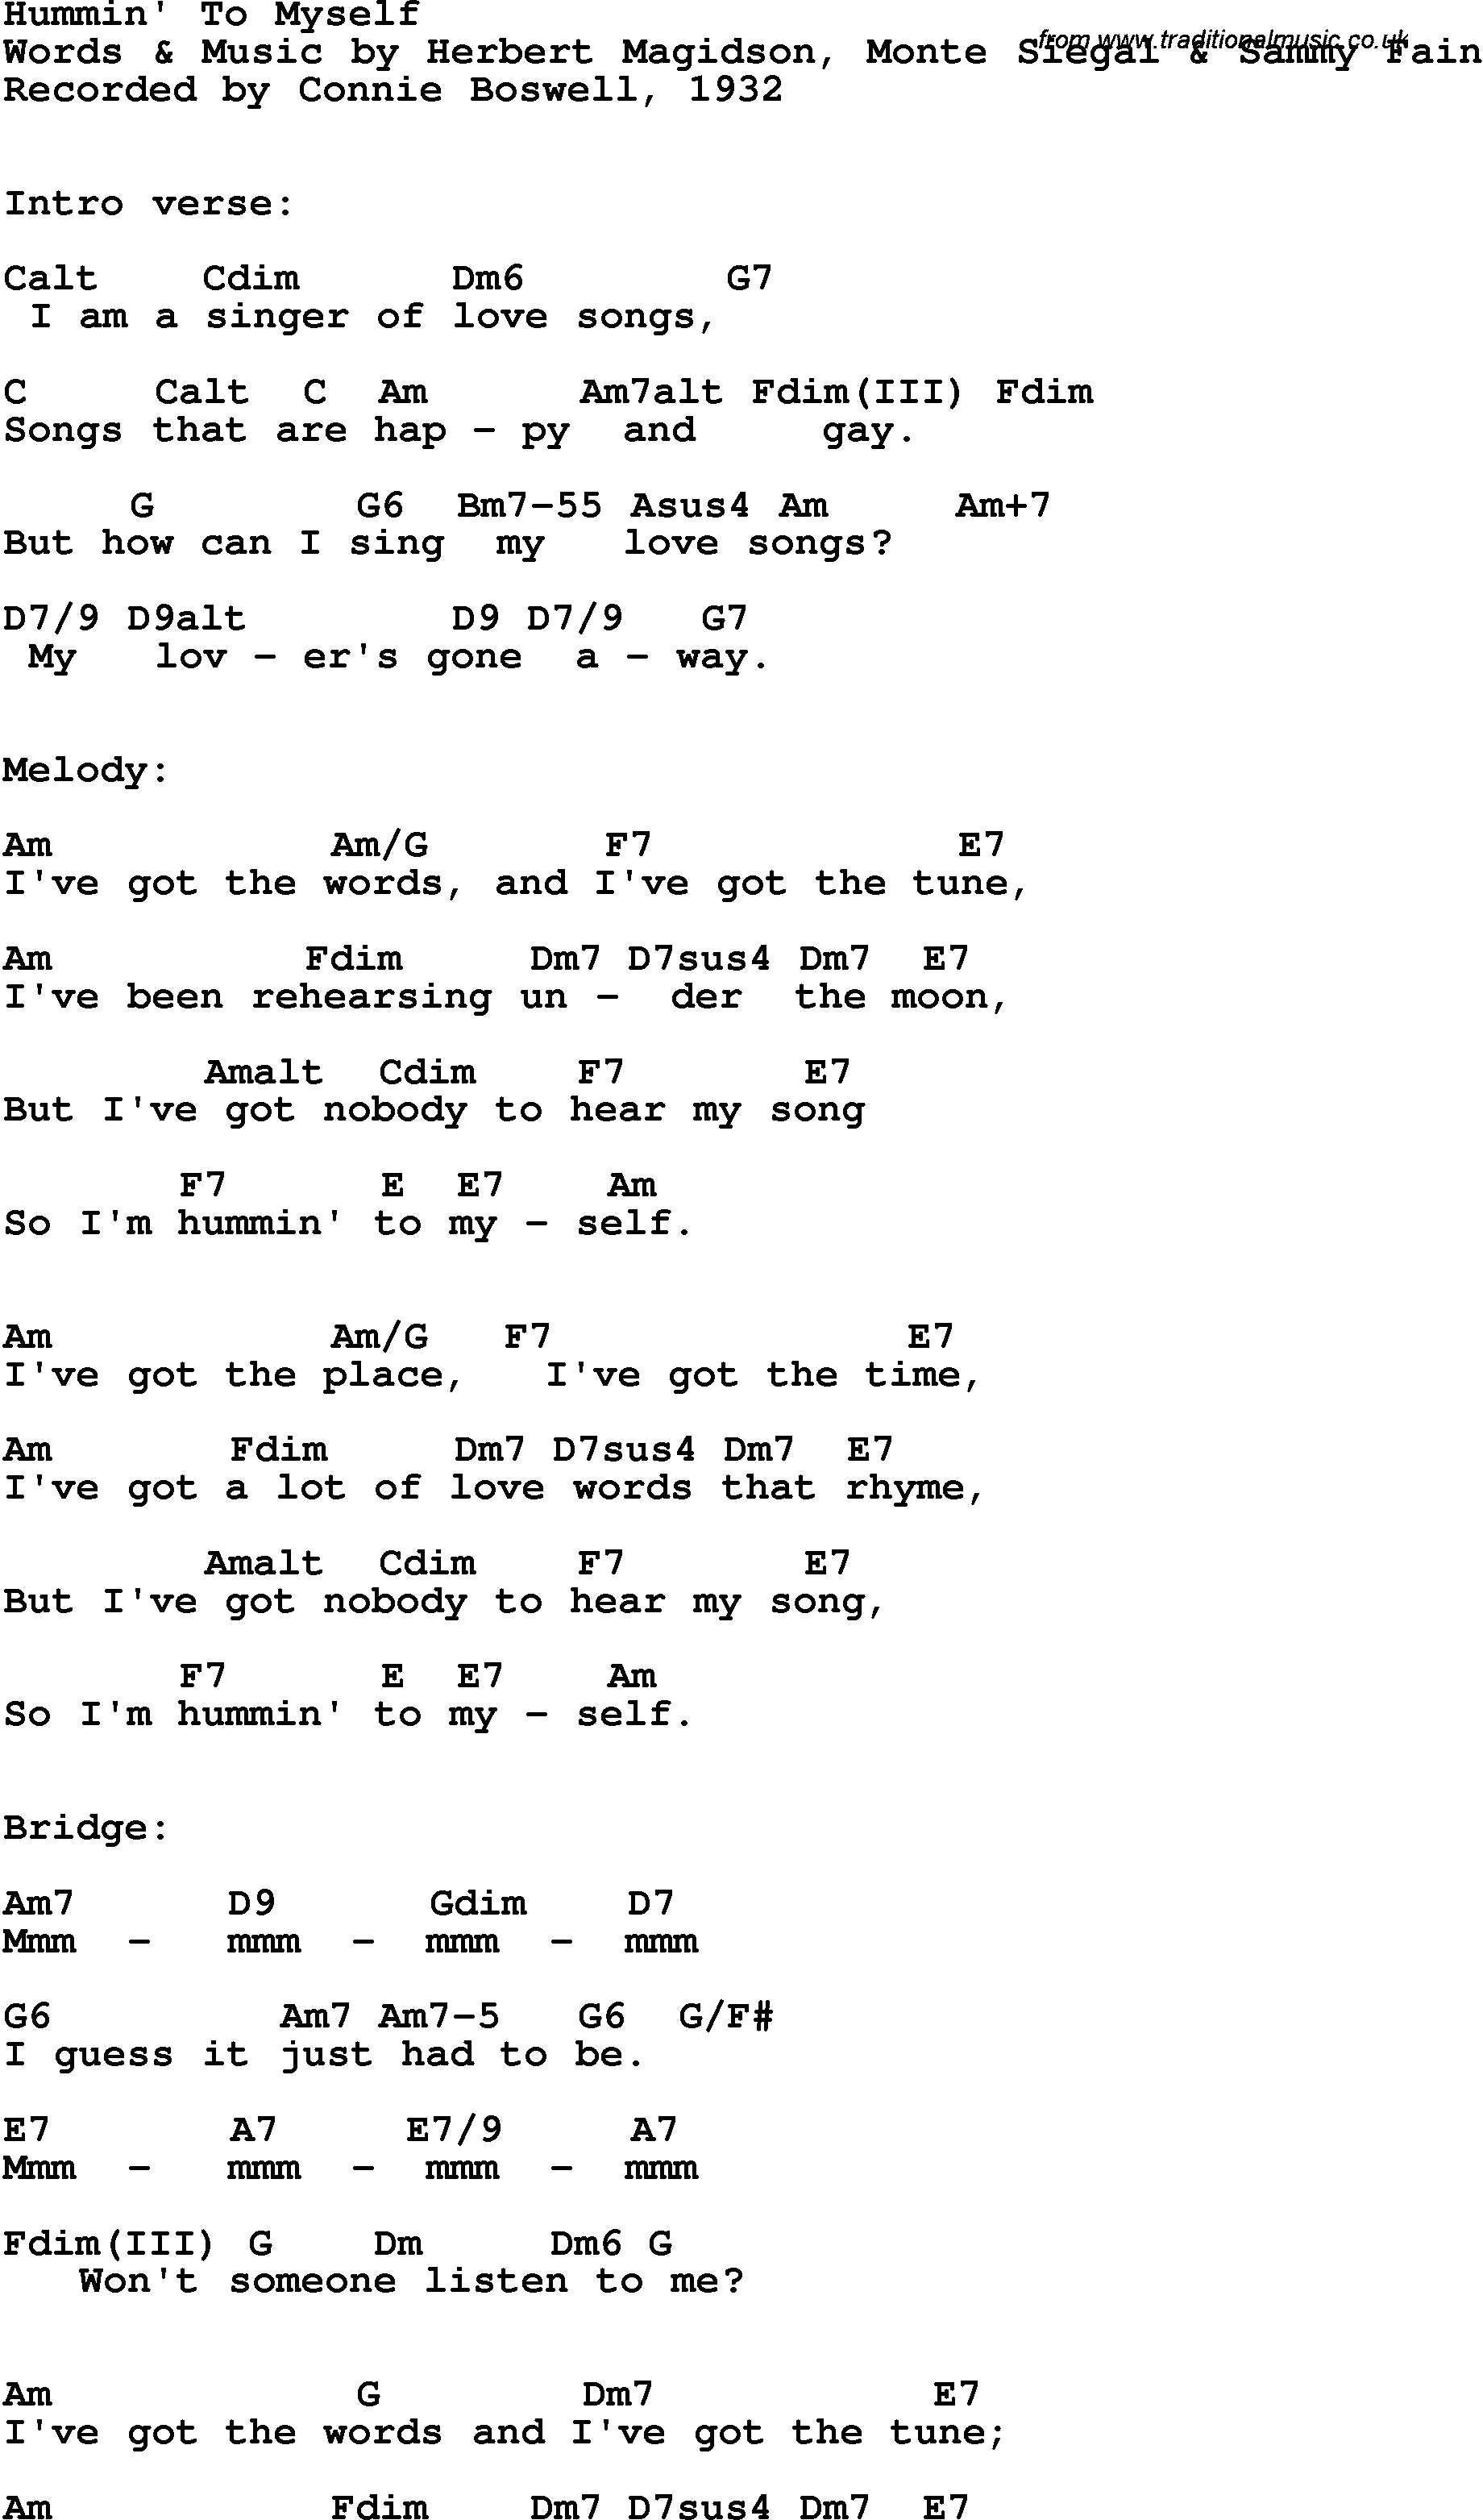 Song Lyrics with guitar chords for Hummin' To Myself - Connie Boswell, 1932